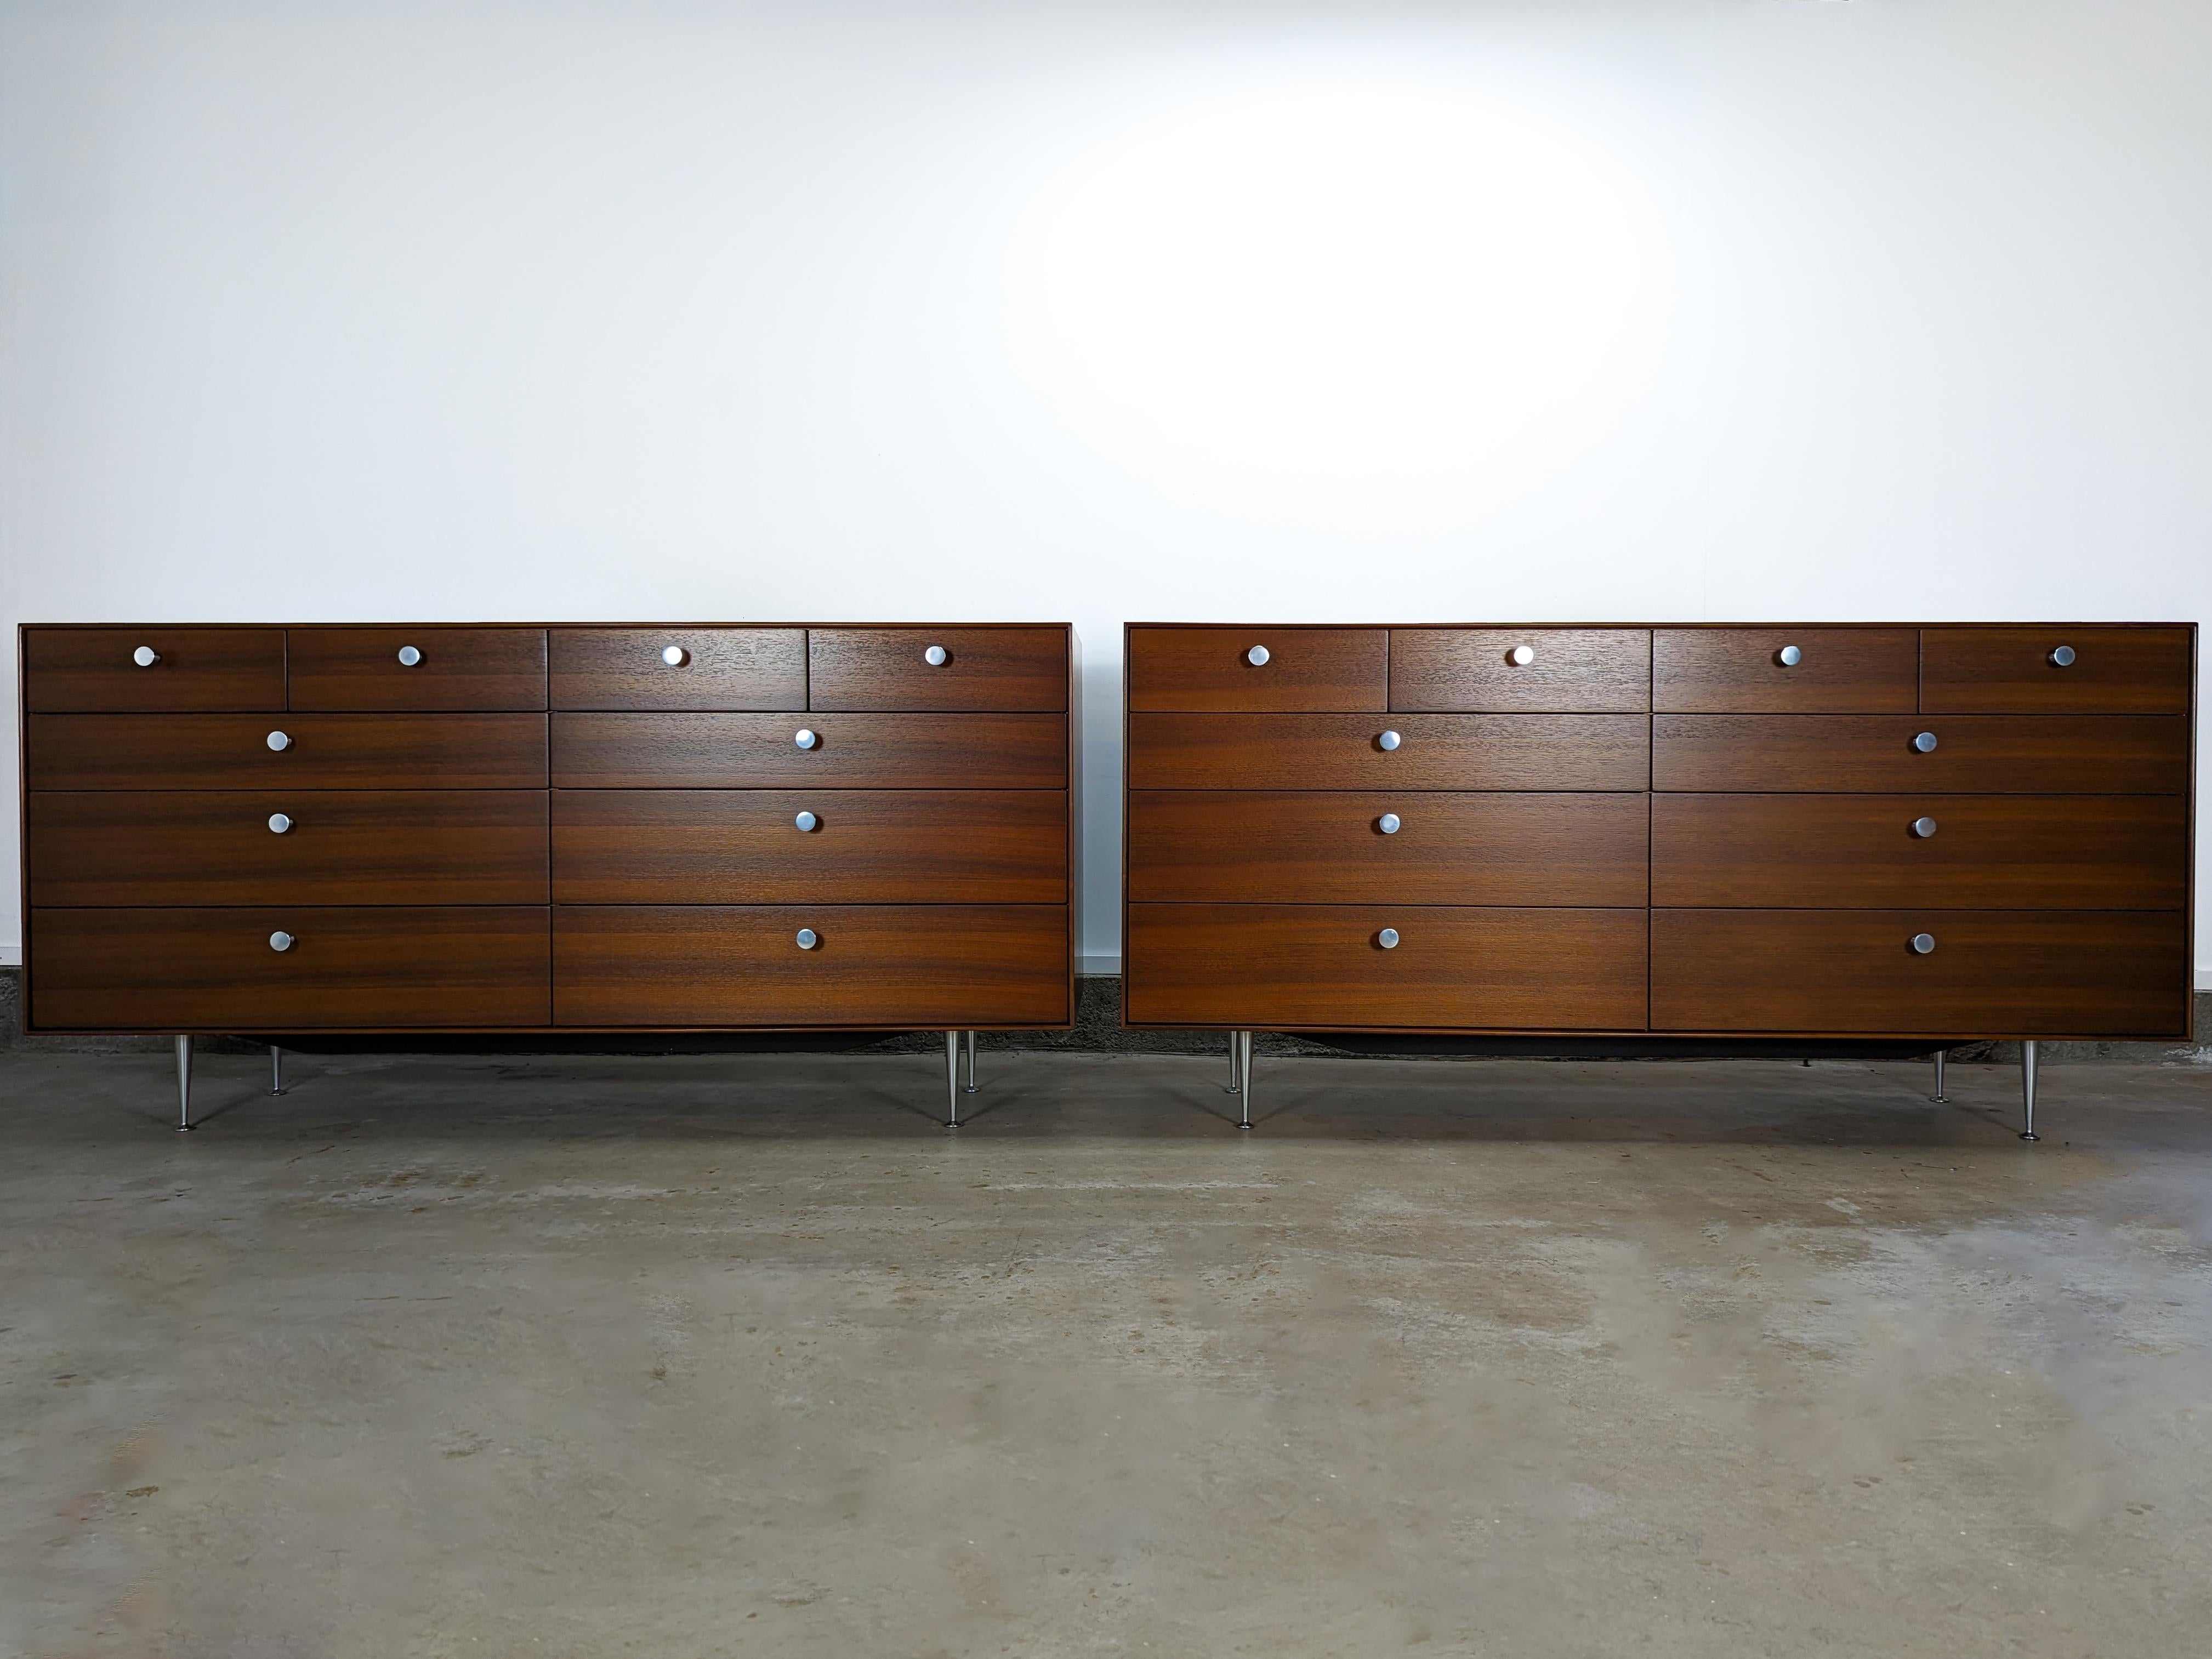 Just in, two matching dressers designed by George Nelson for Herman Miller, c1950s. Sourced from the original owner in the Pacific Palisades of California, these beauties have received a professional refinish and are in excellent condition. They